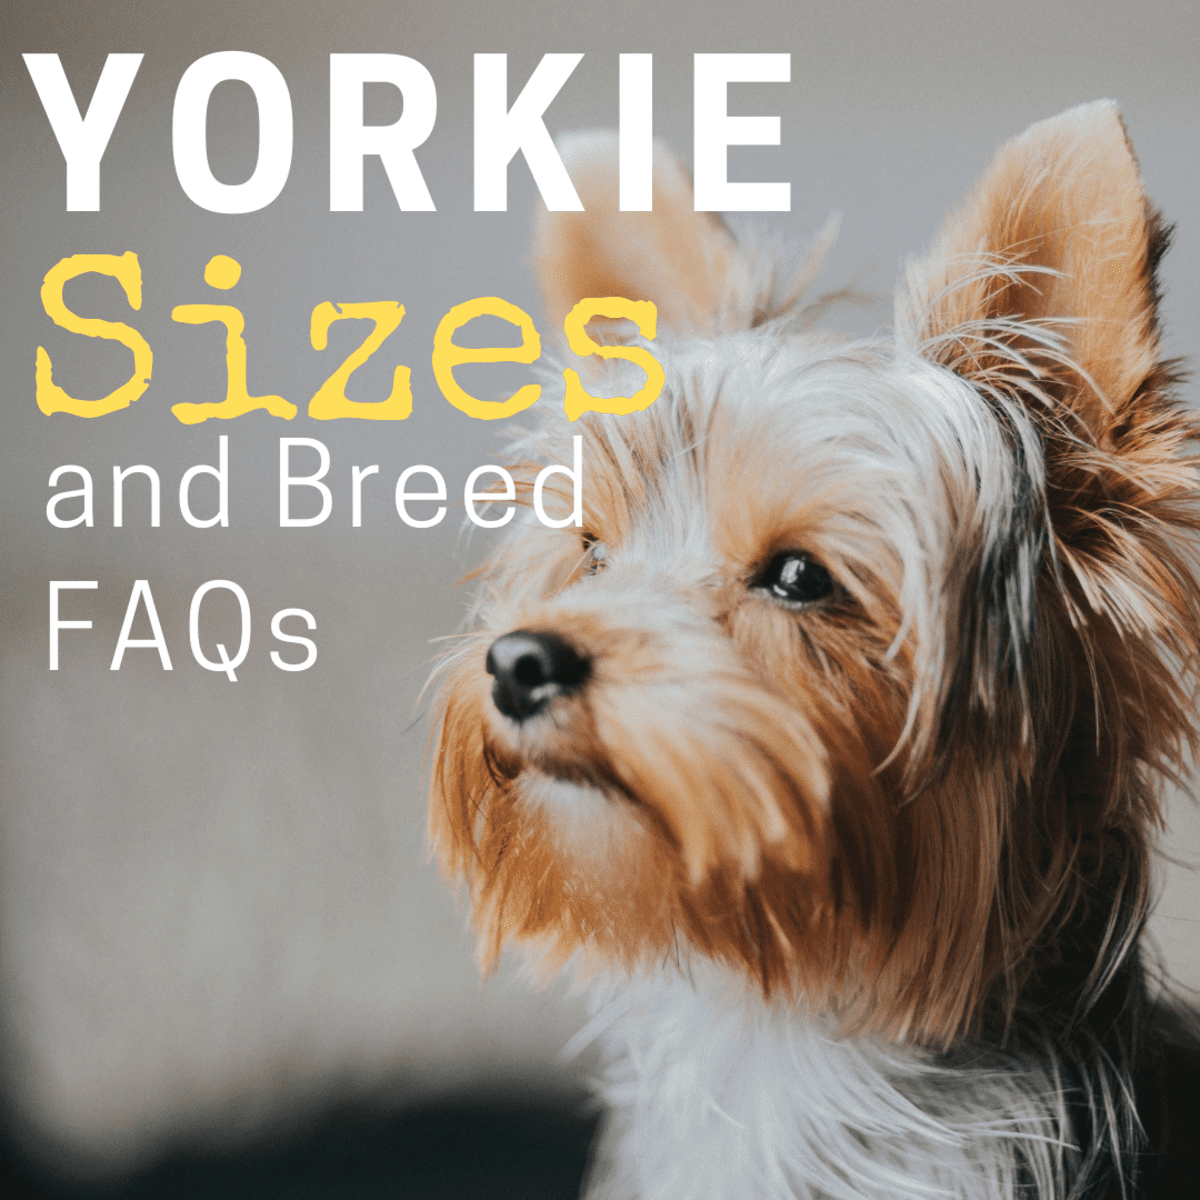 what color are yorkie puppies when they are born